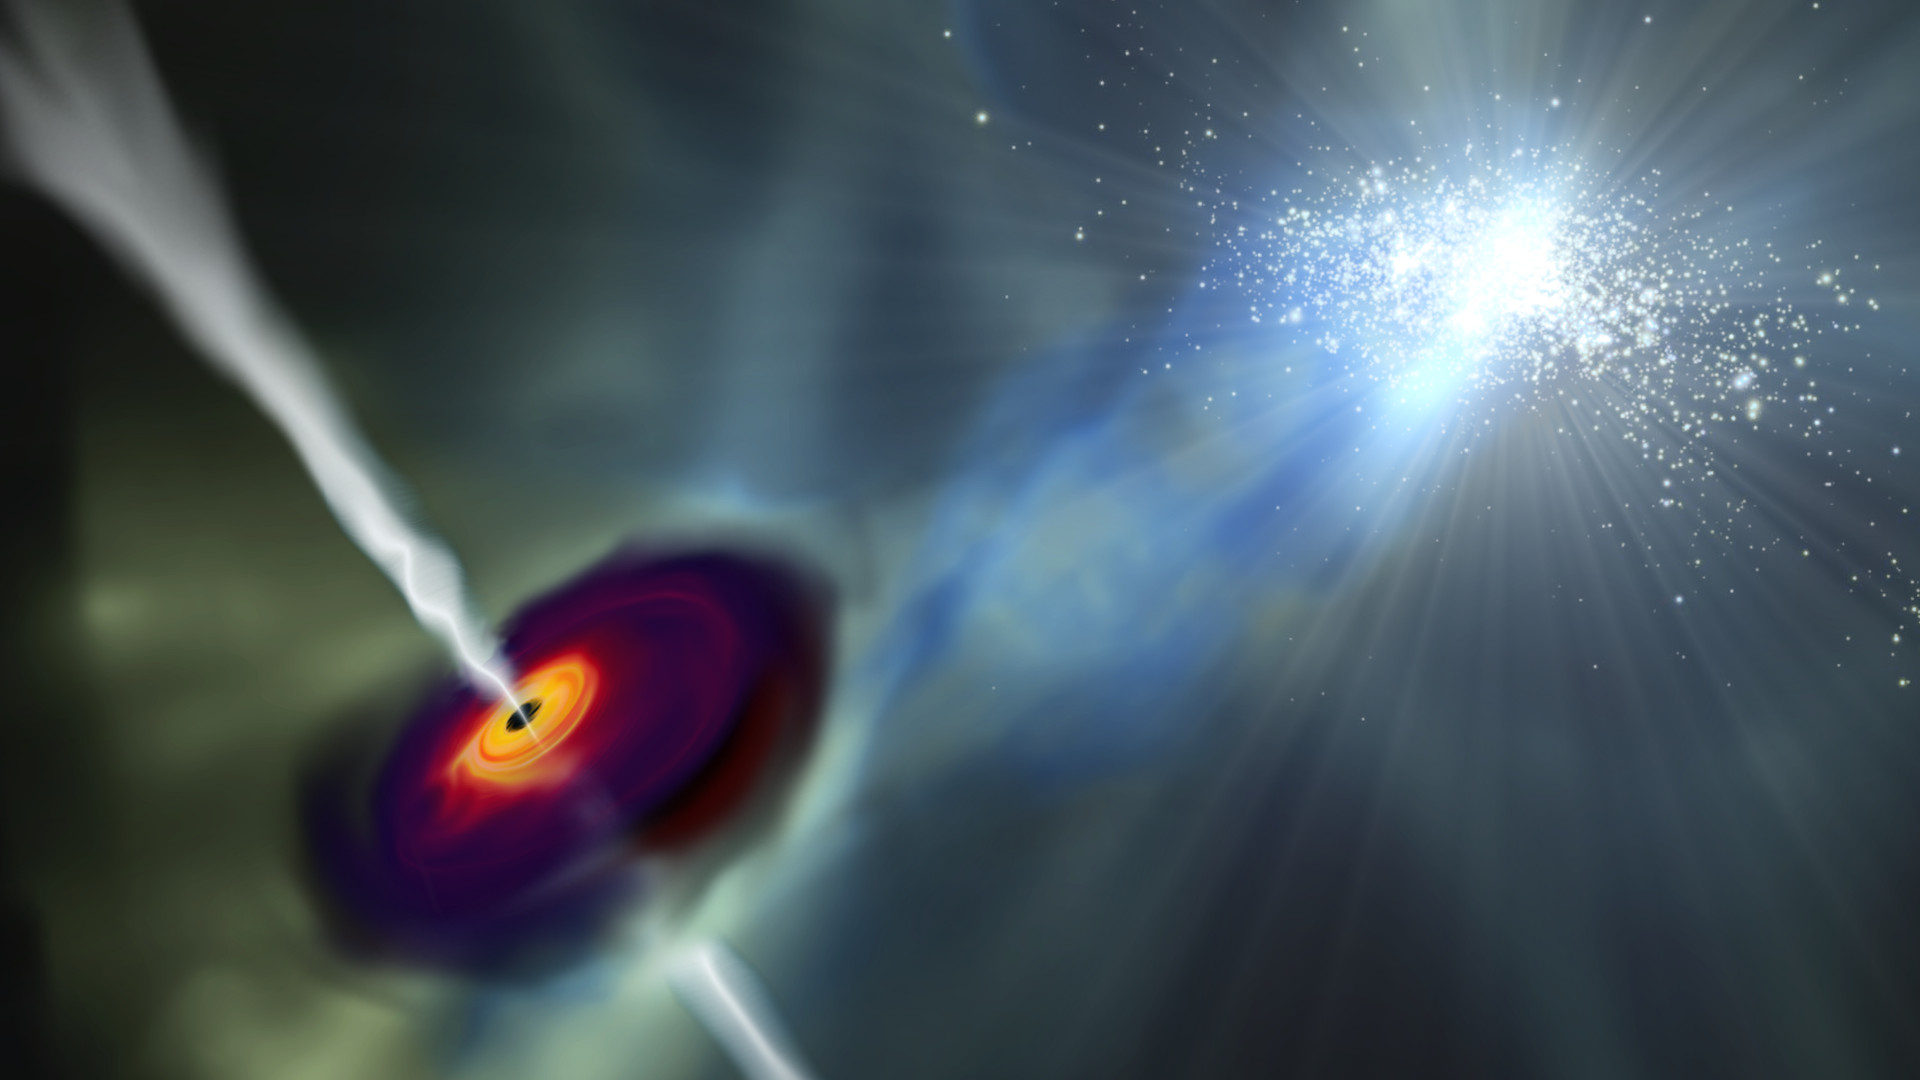 The massive black hole shown at left in this drawing is able to rapidly grow as intense radiation from a galaxy nearby shuts down star formation in its host galaxy. (Credit: John Wise)